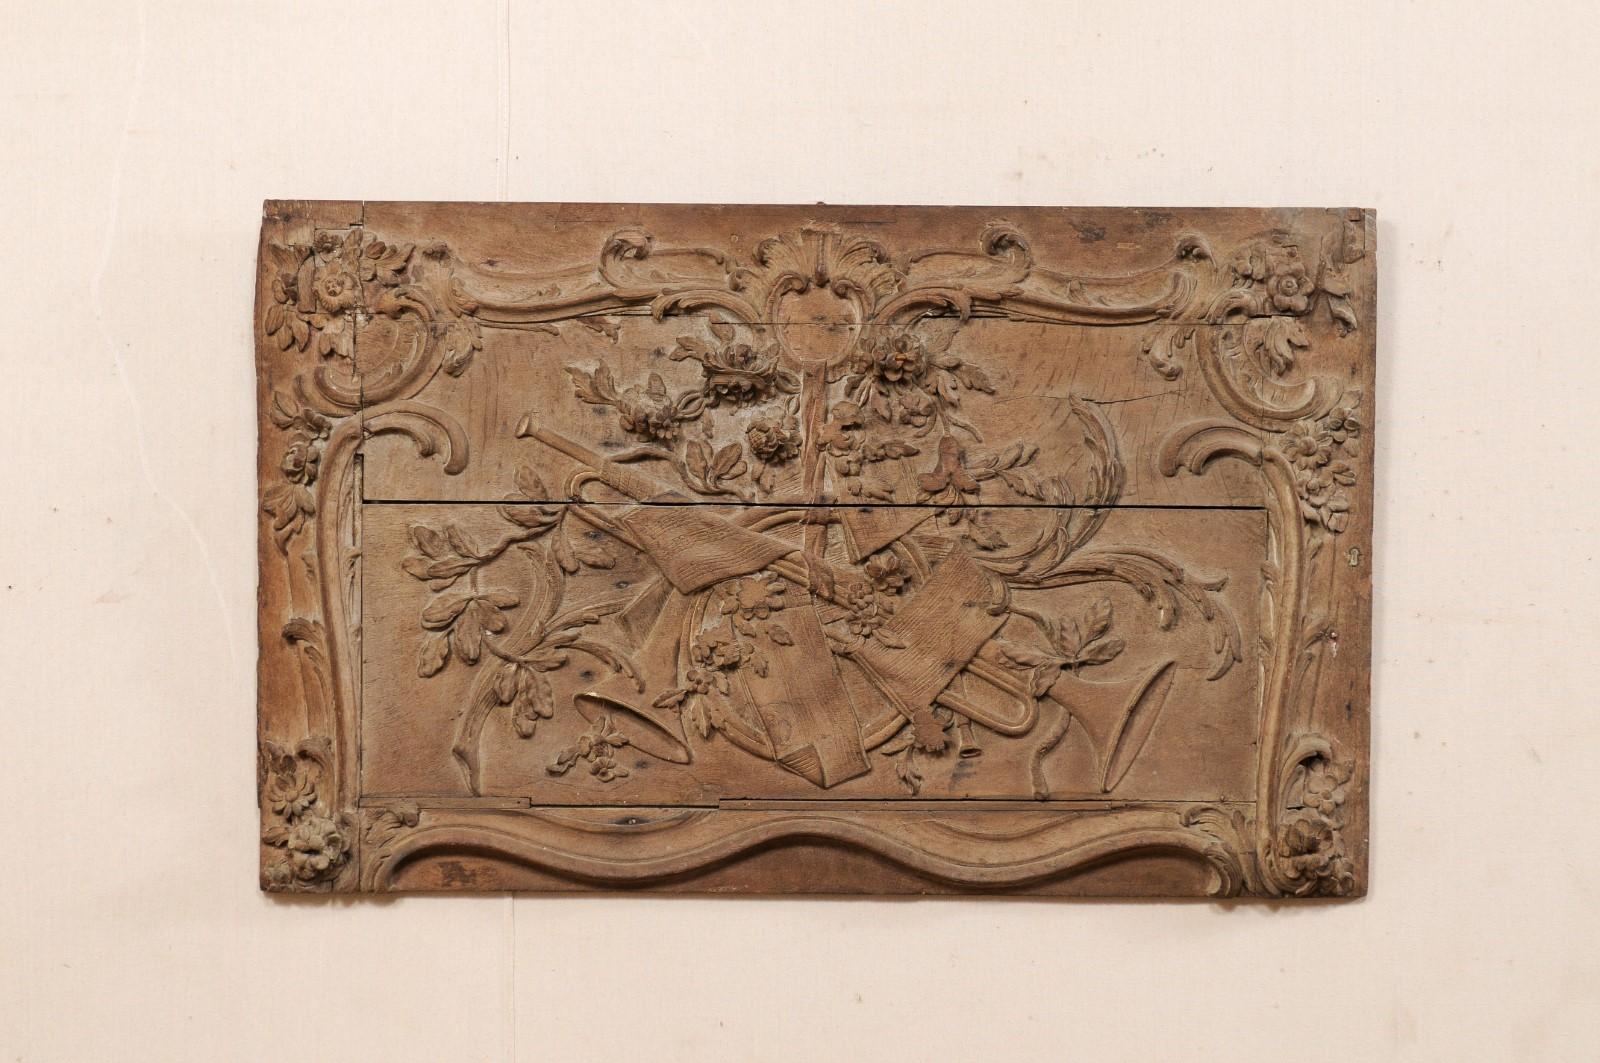 A French musically inspired carved-wood wall plaque from the 18th century. This antique wall decoration from France is rectangular in shape and has raised carvings which depicts a musical motif with horn instruments and sheet music at it's center,